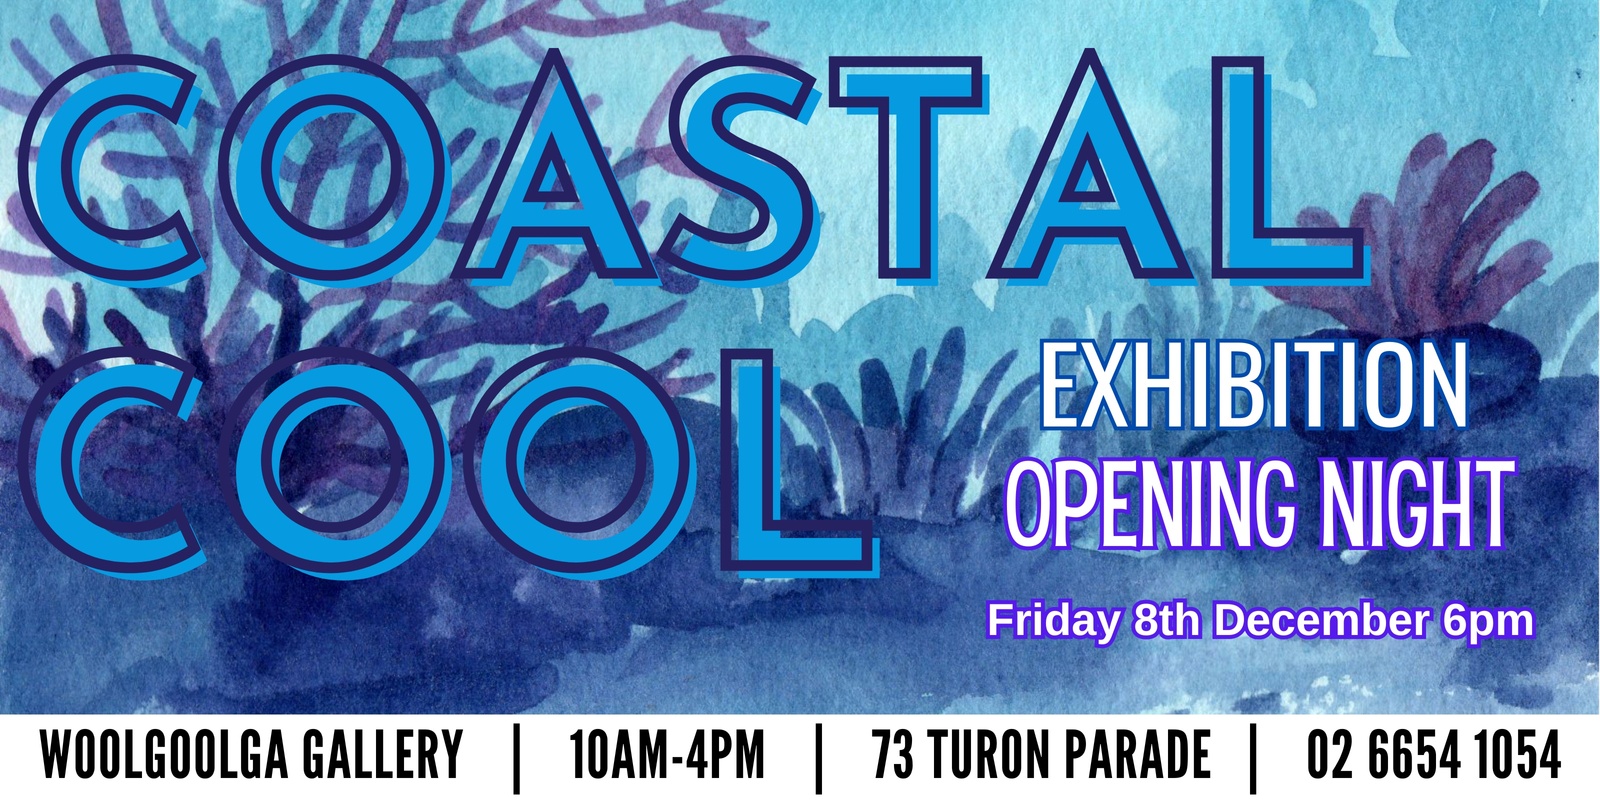 Banner image for Coastal Cool Exhibition Opening